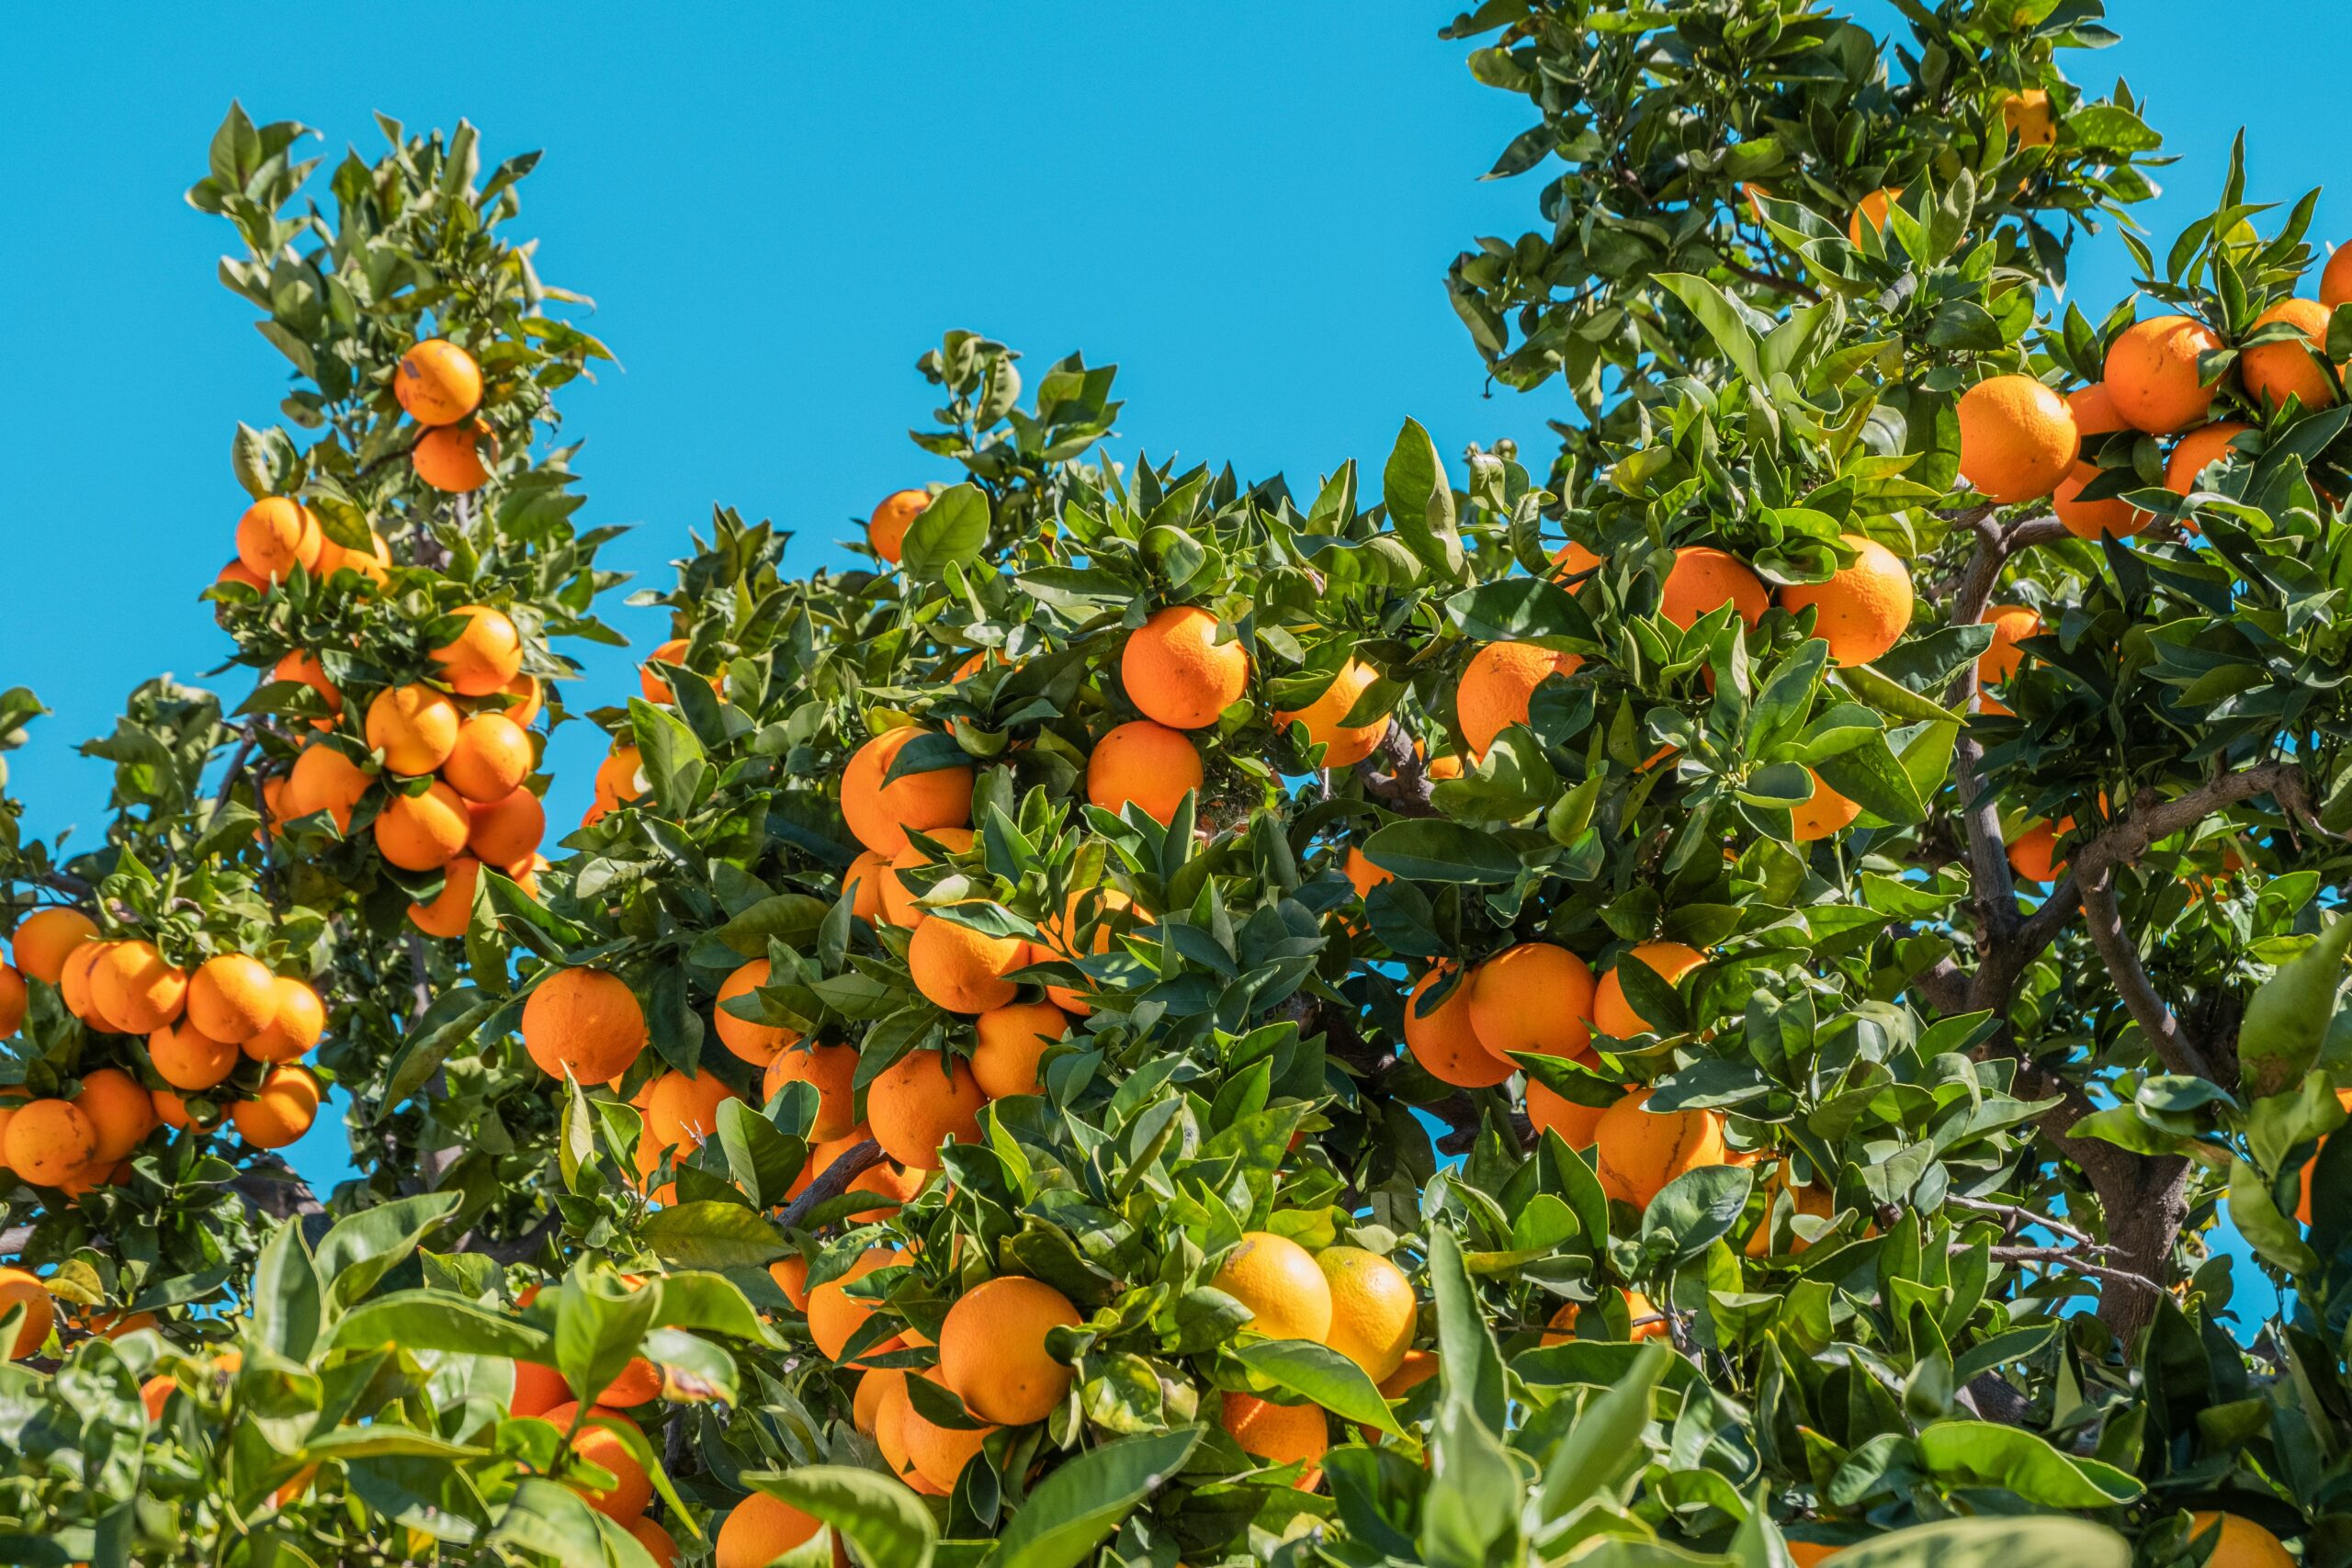 Can everyone drink a cortisol cocktail? Let's break it down here. Pictured: A tree with oranges